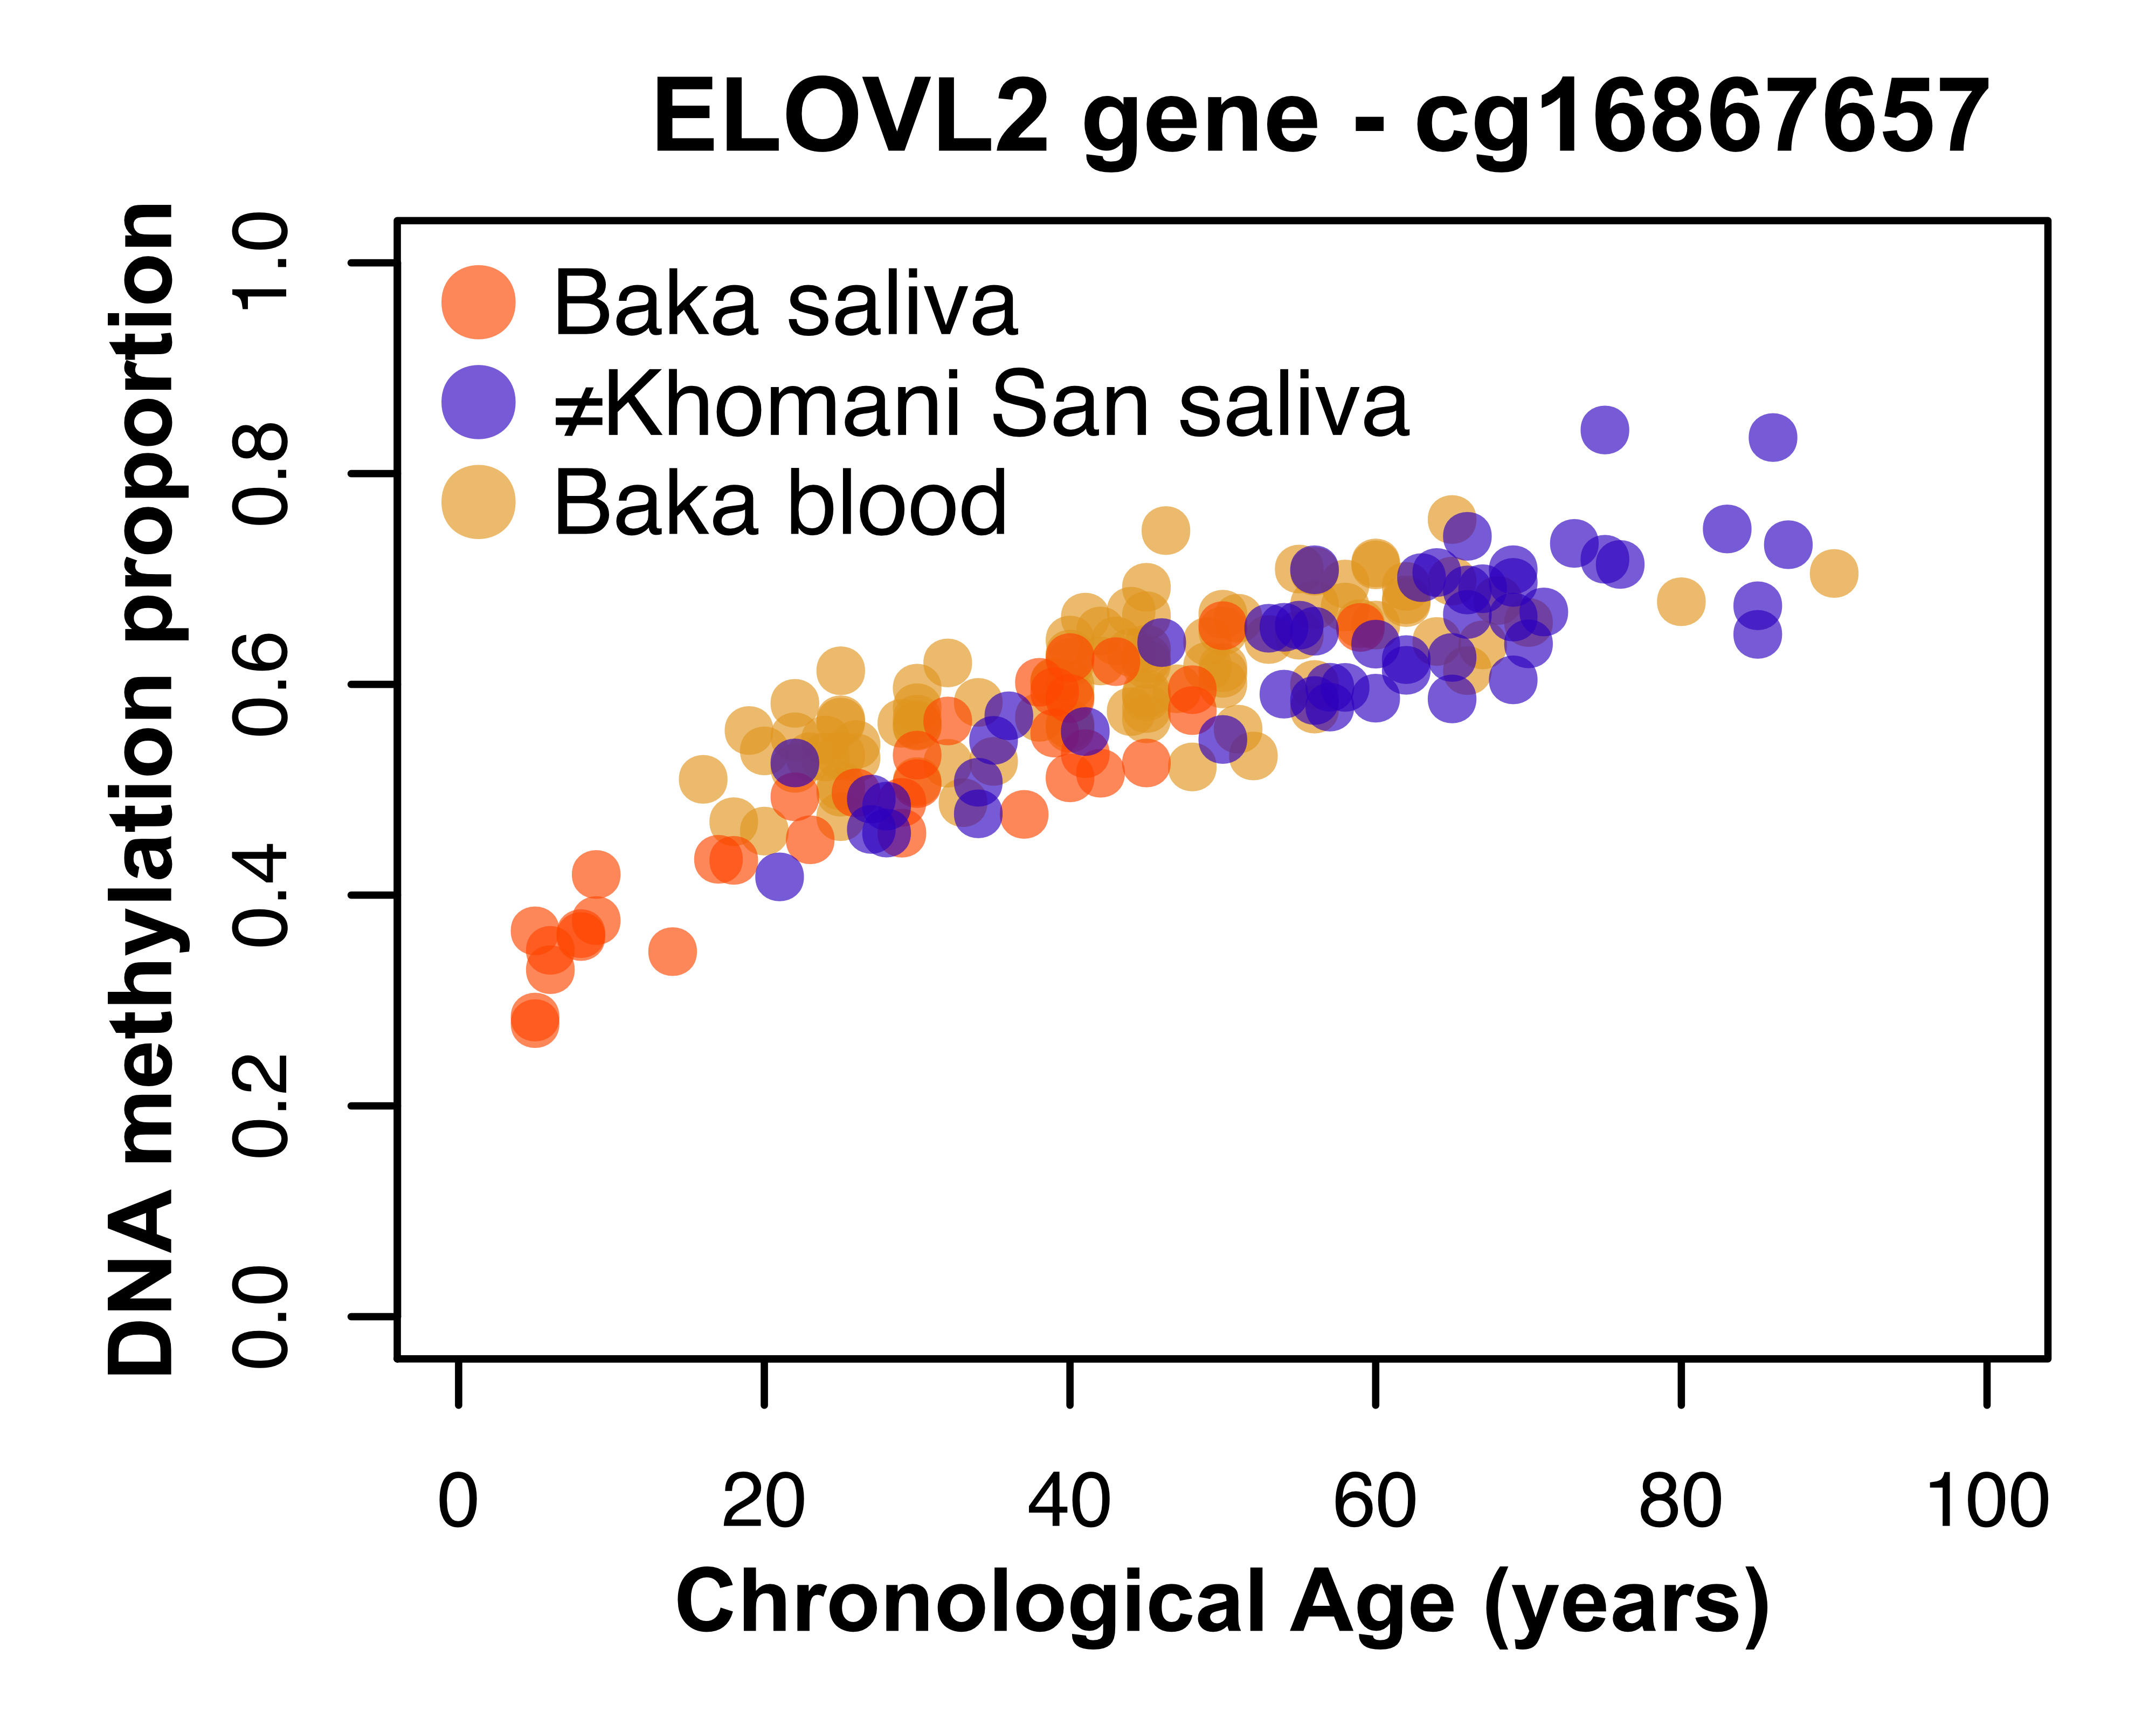 DNA methylation level increases with age at a CpG site near the gene ELOVL2